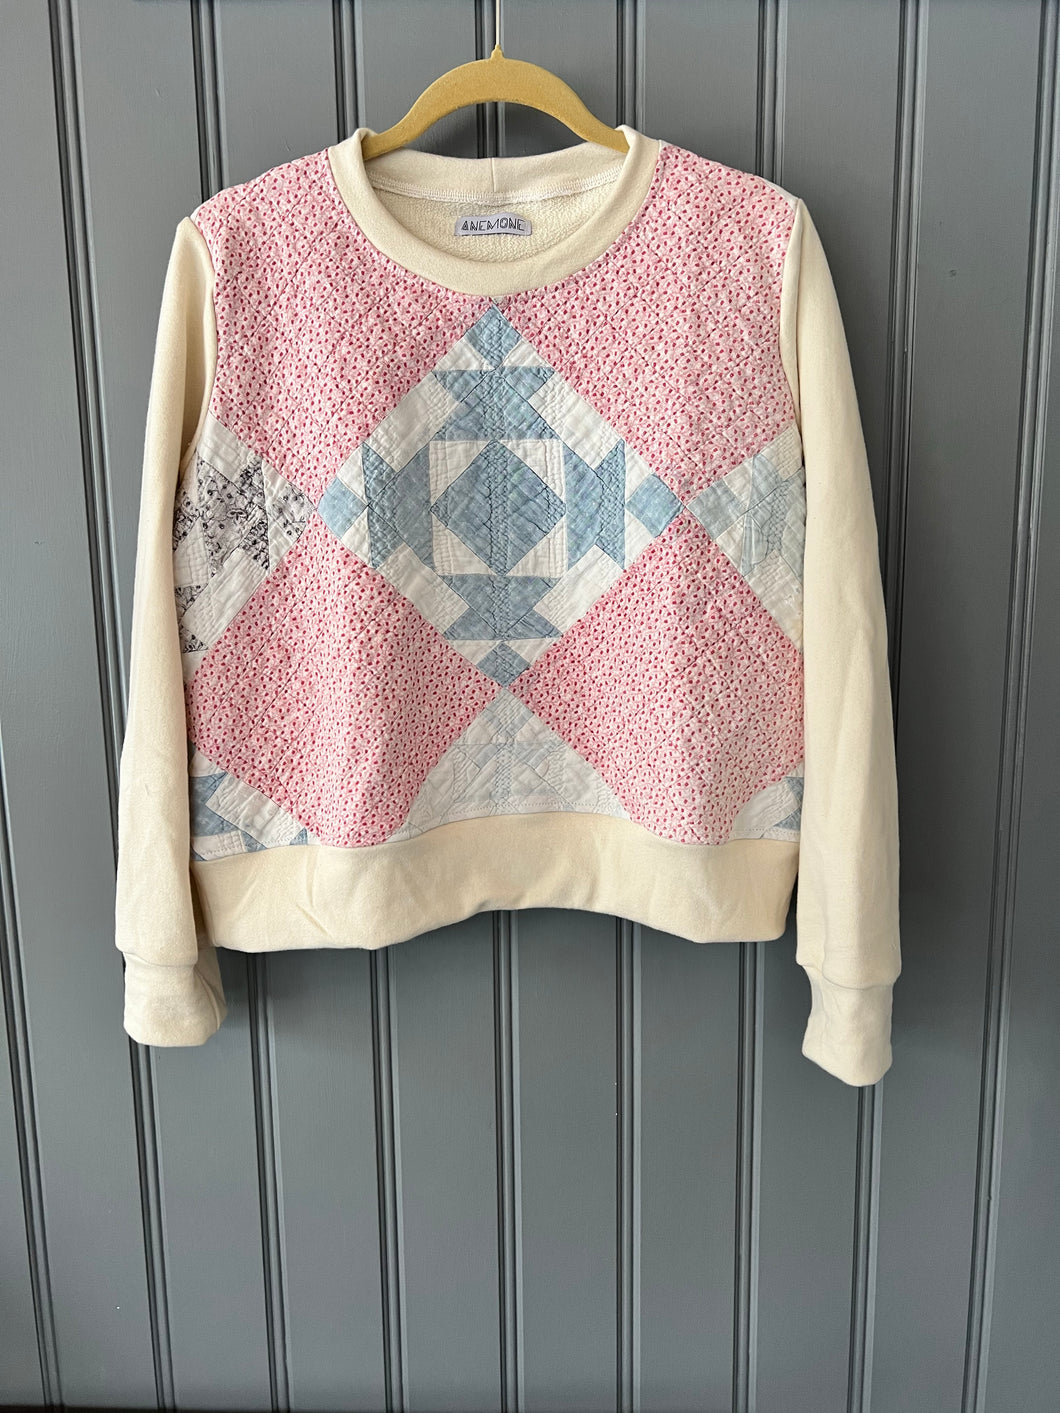 One-of-a-Kind: Square and Star Pullover (L)